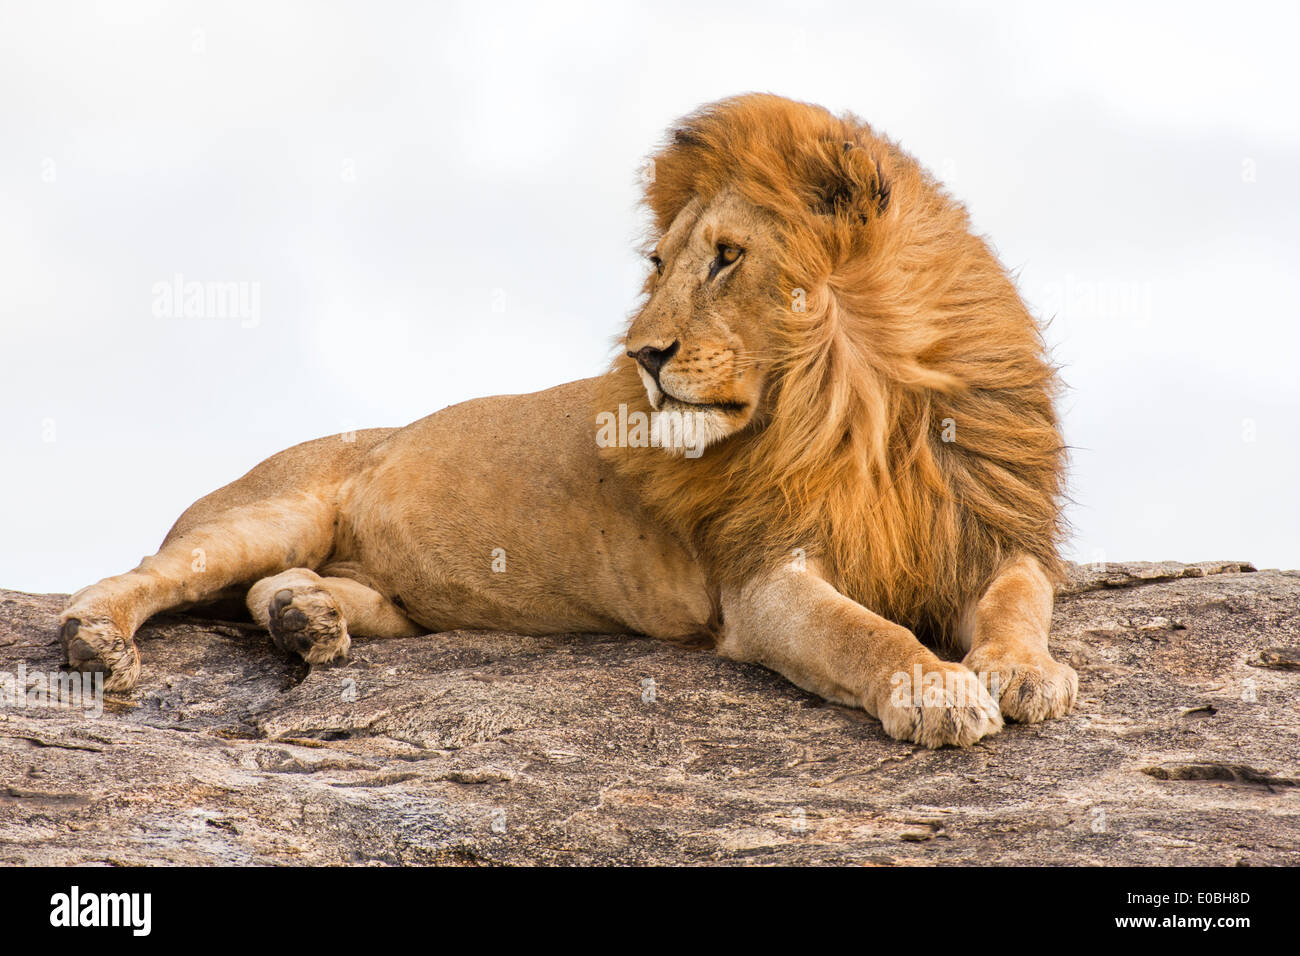 lion (Panthera leo) on a rock boulder Photographed in Tanzania Stock Photo